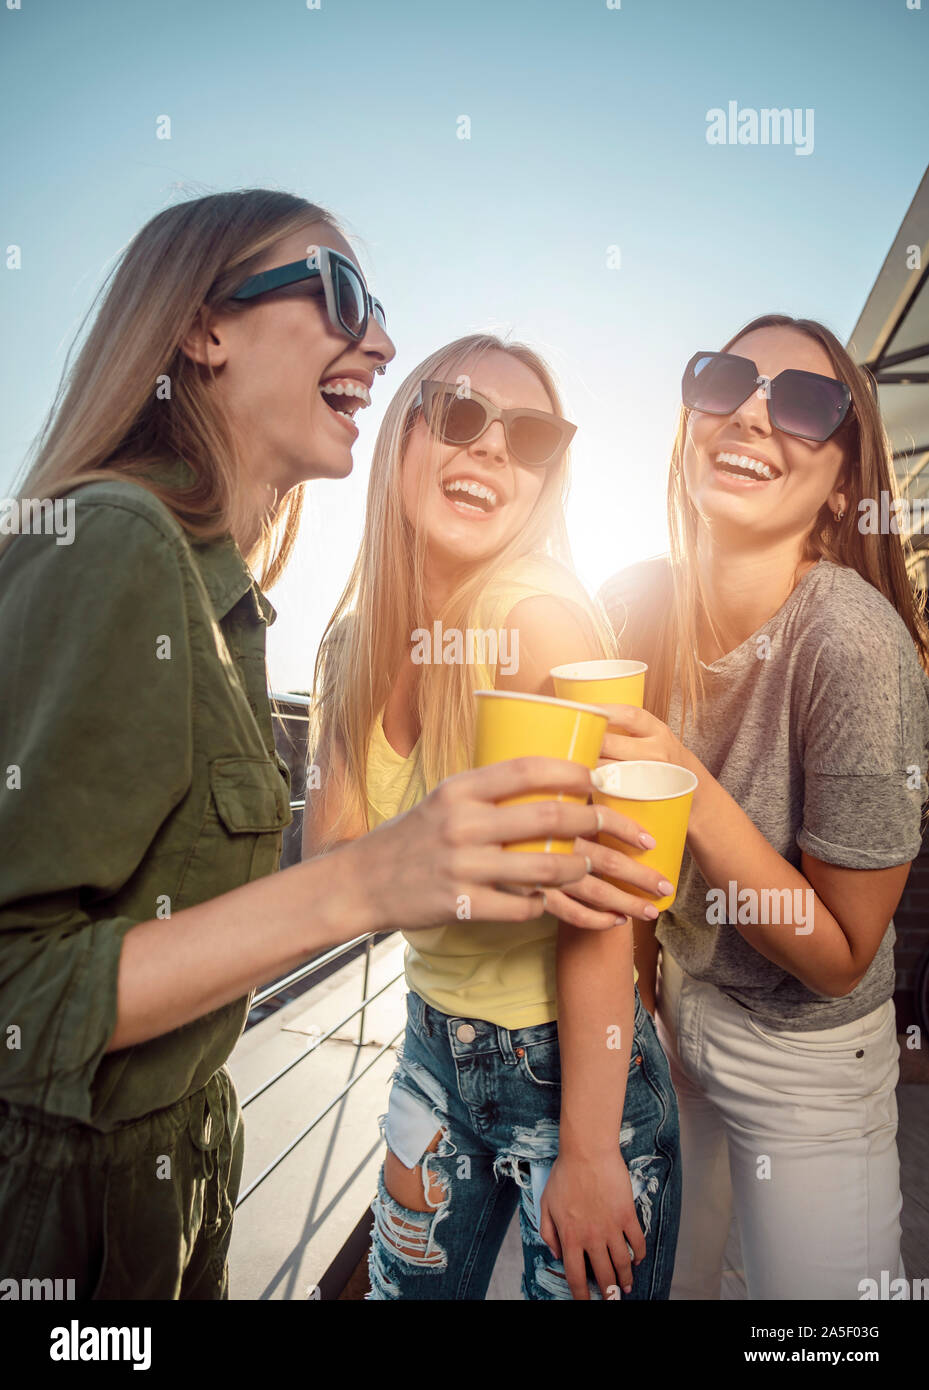 Smiling pretty women in sunglasses drinking on a sunny balcony Stock Photo